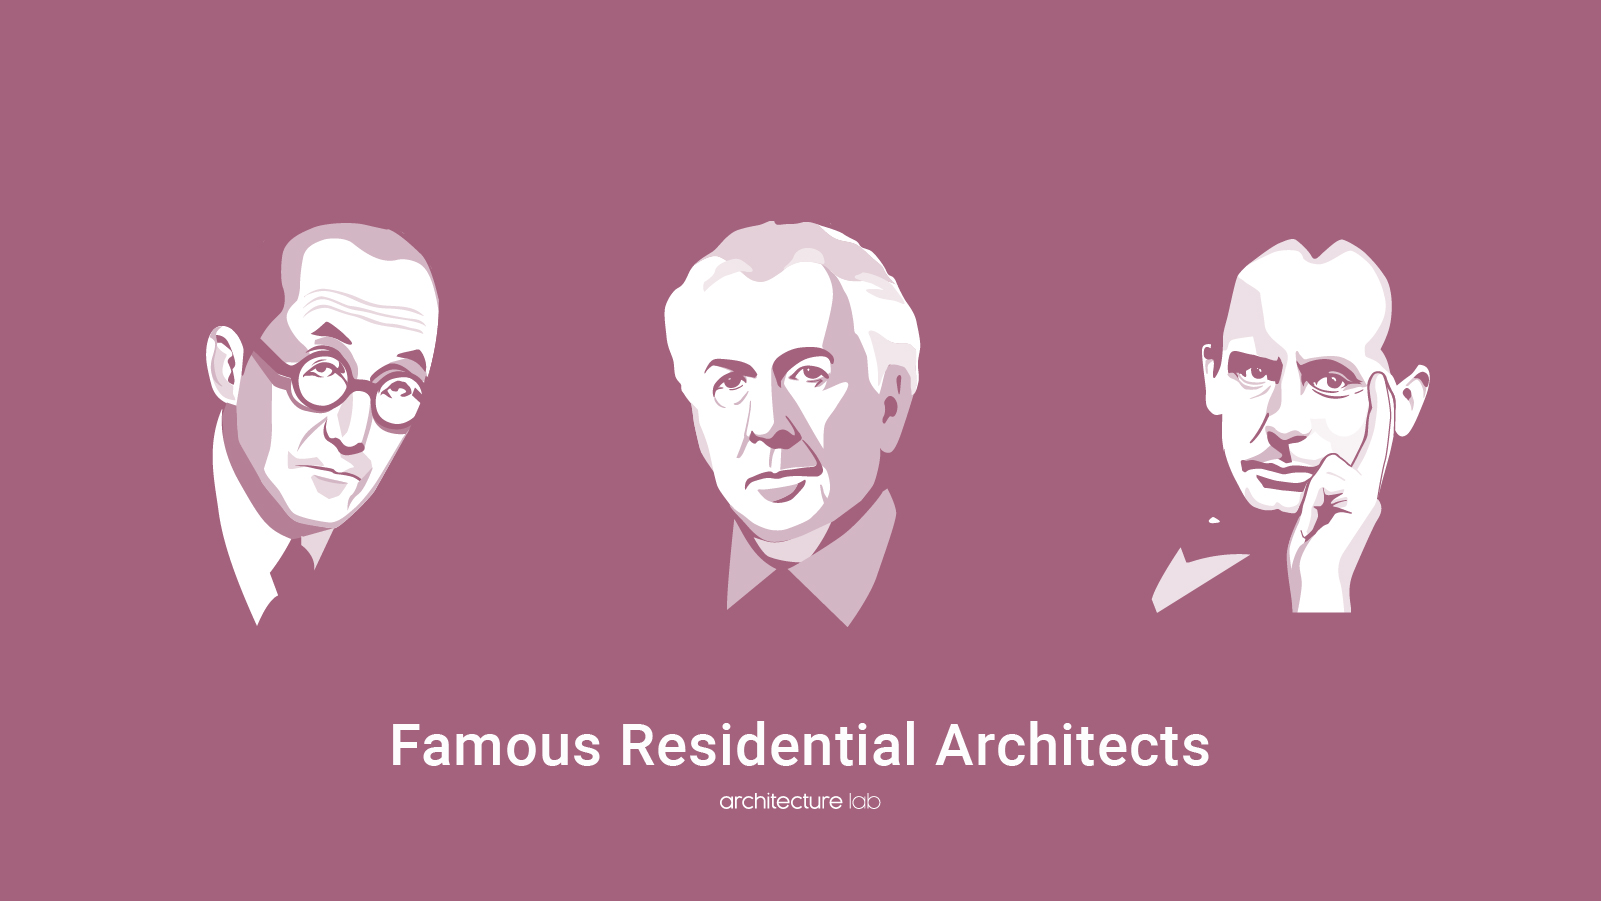 18 famous residential architects and their proud works